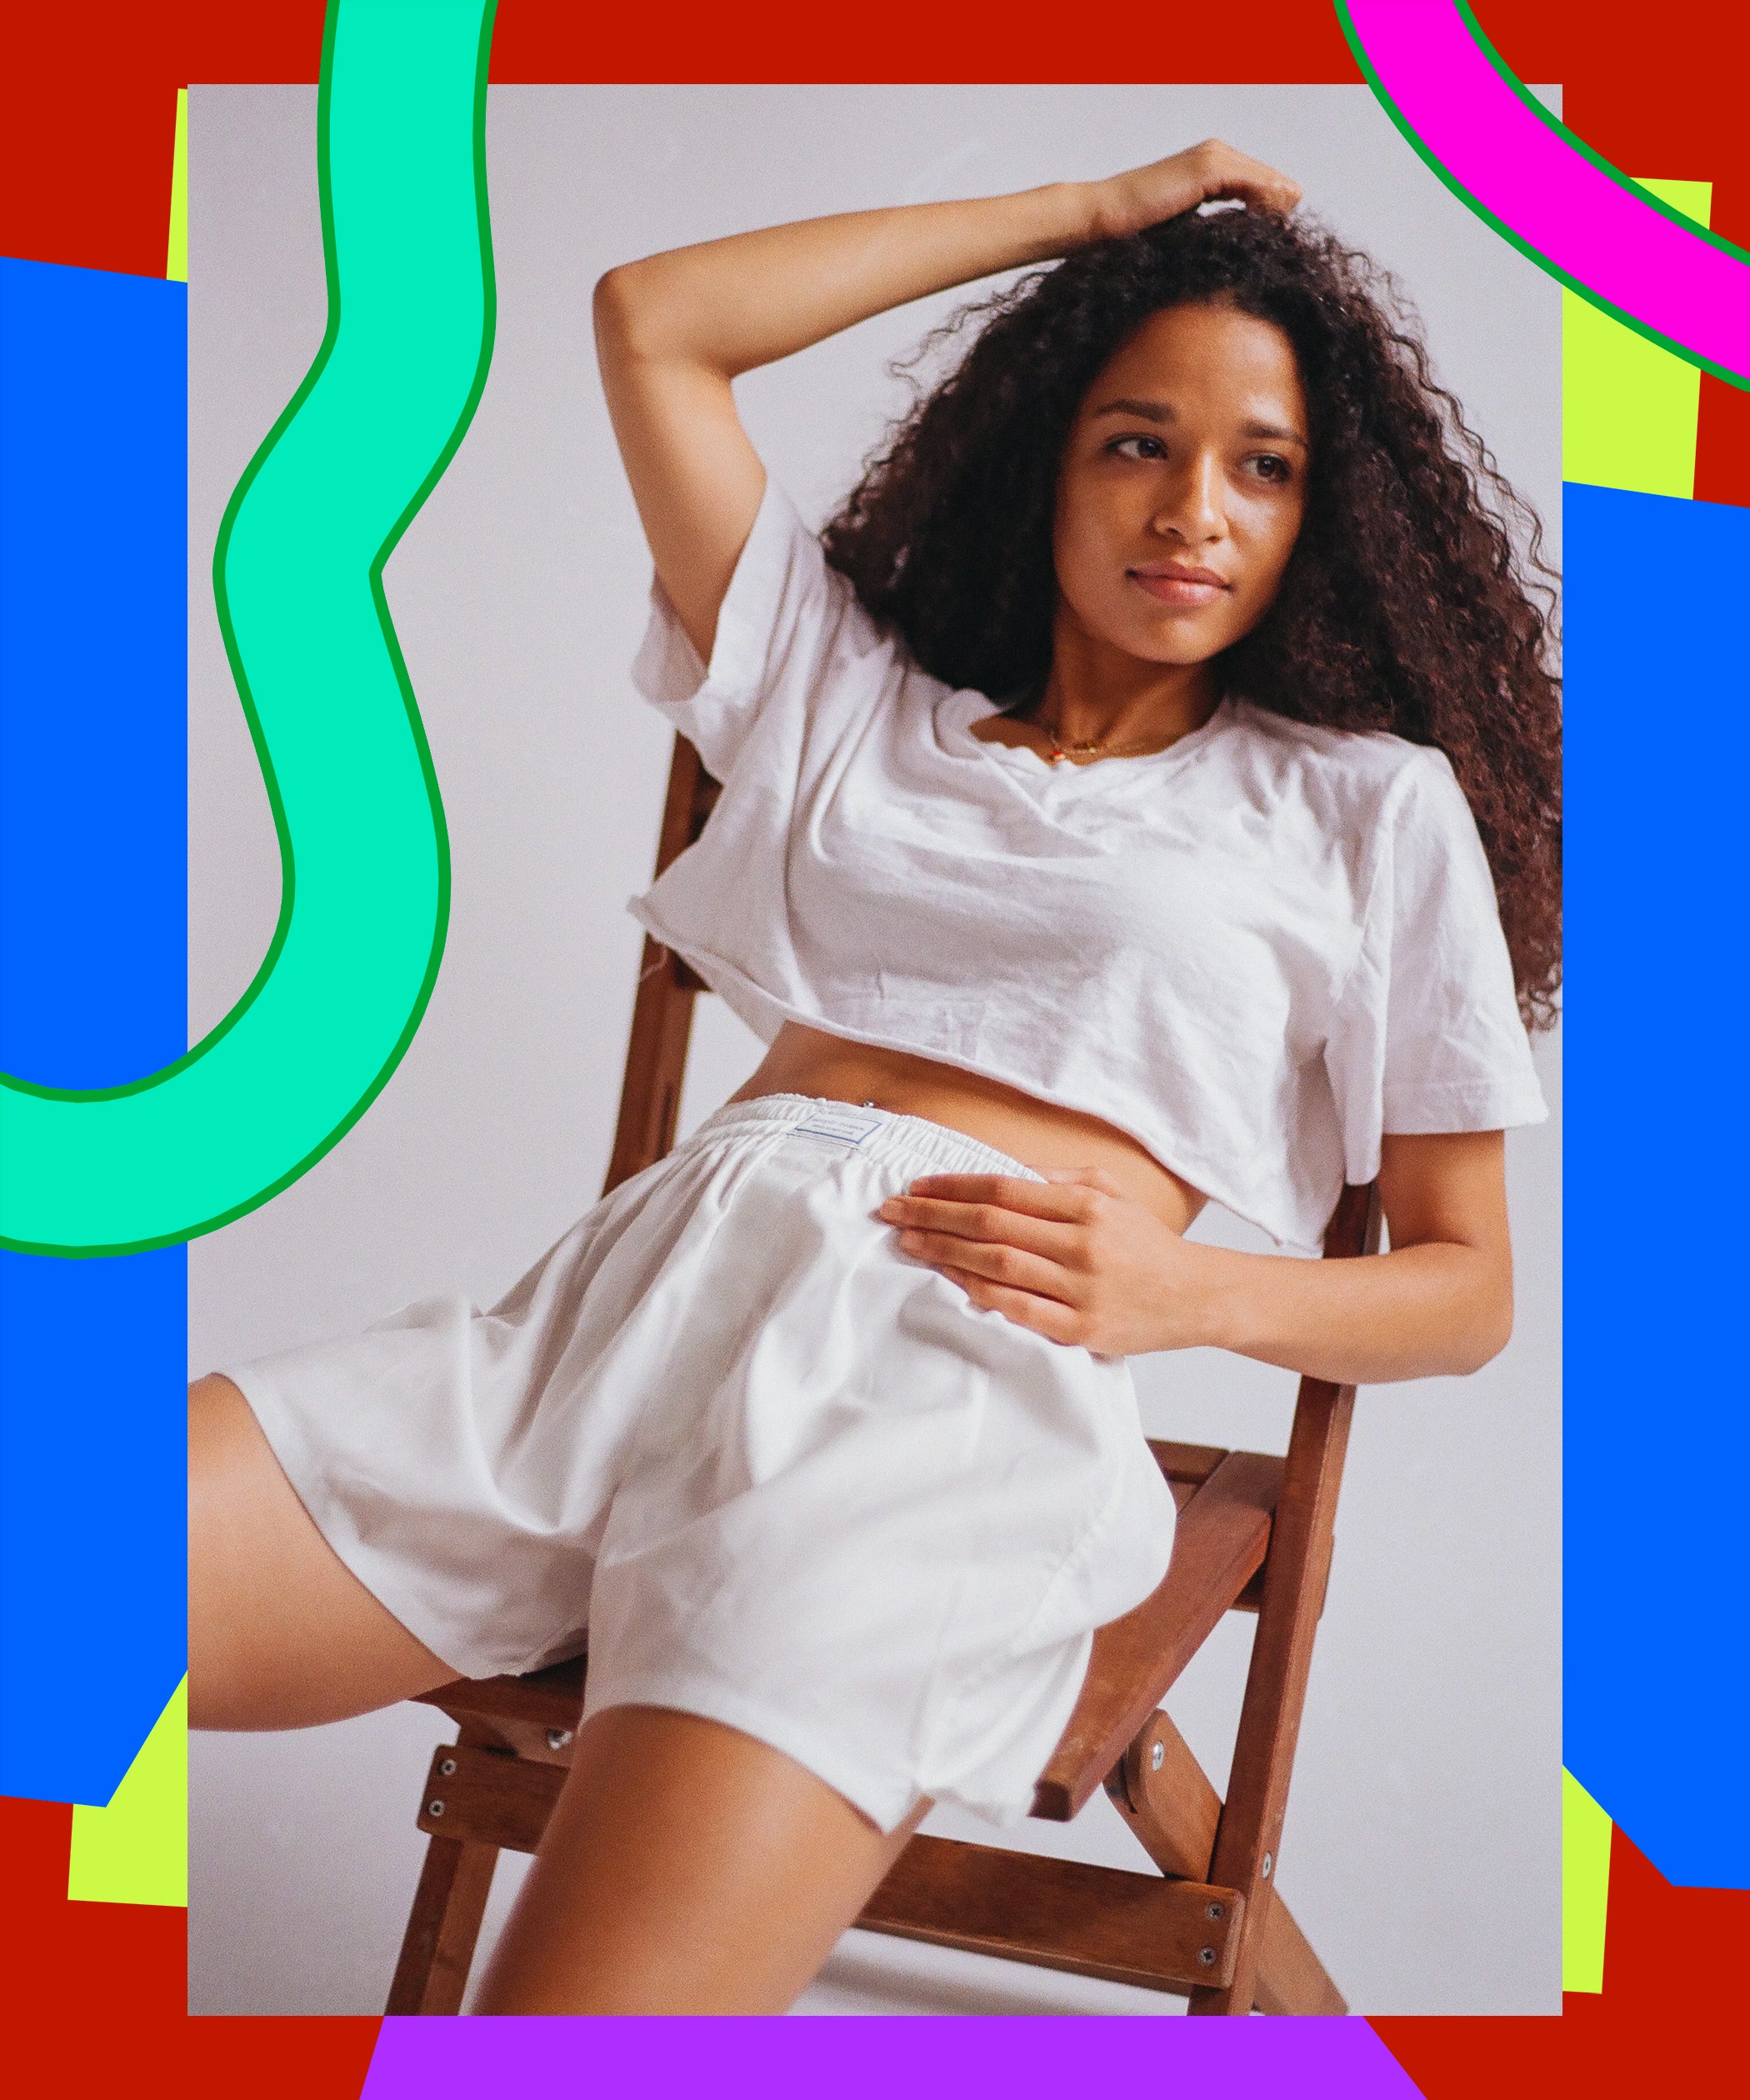 Women's Boxer Shorts Are A Must-Have In Your Summer Wardrobe